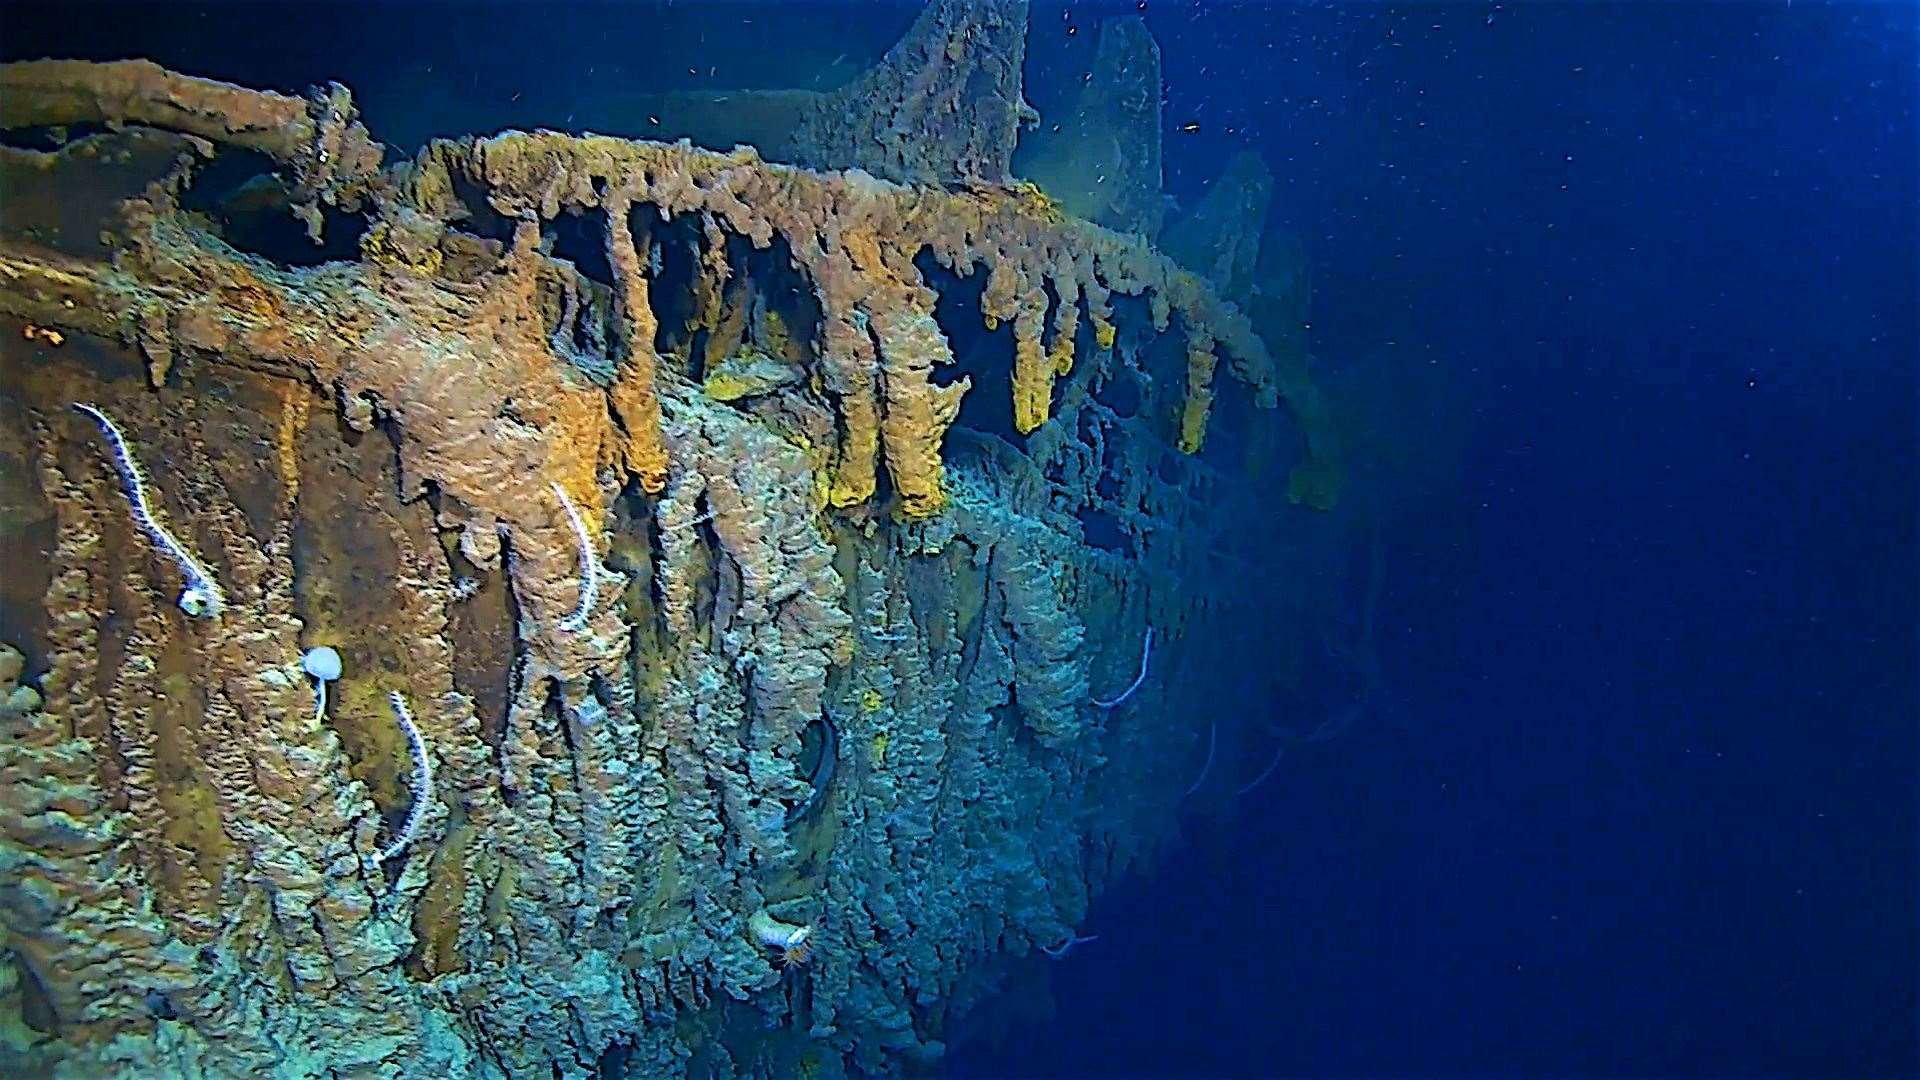 The side of the RMS Titanic in her resting place at the bottom of the North Atlantic Ocean (Atlantic Productions/PA)